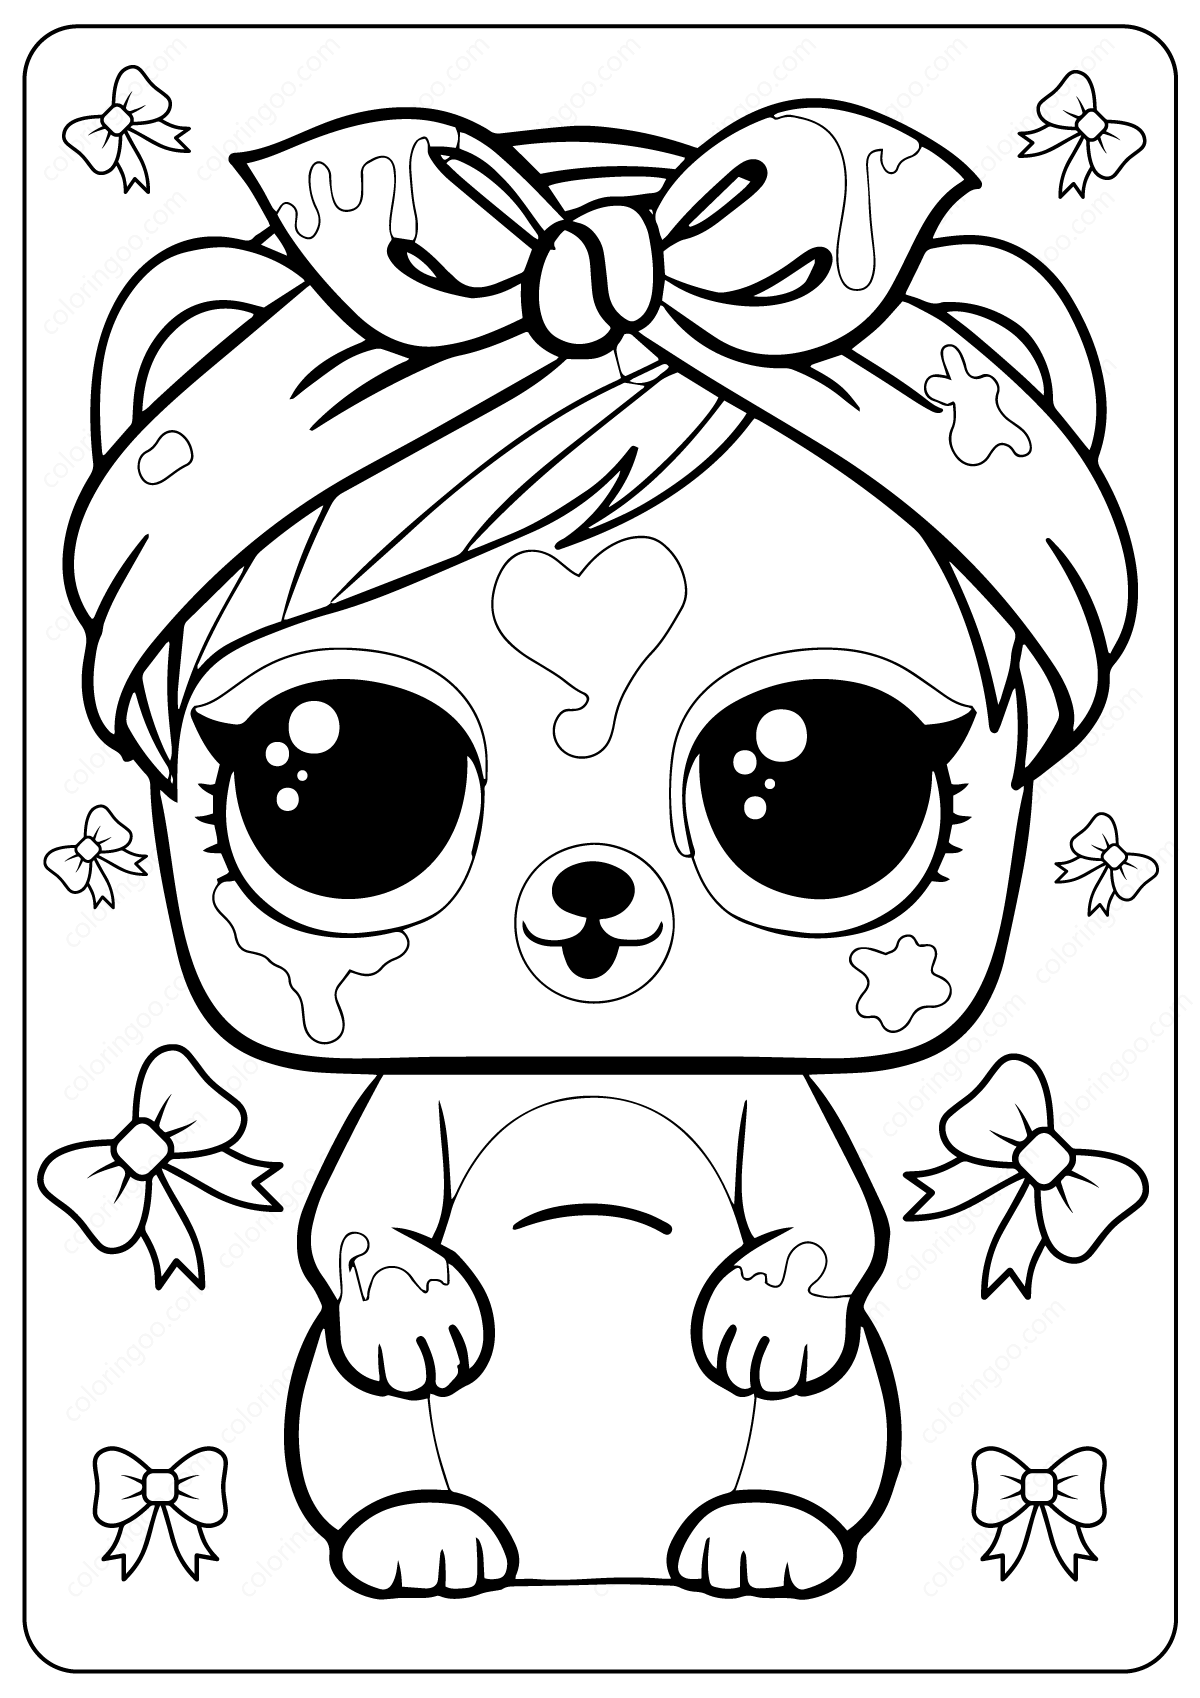 LOL Coloring Pages FREE Printable 39